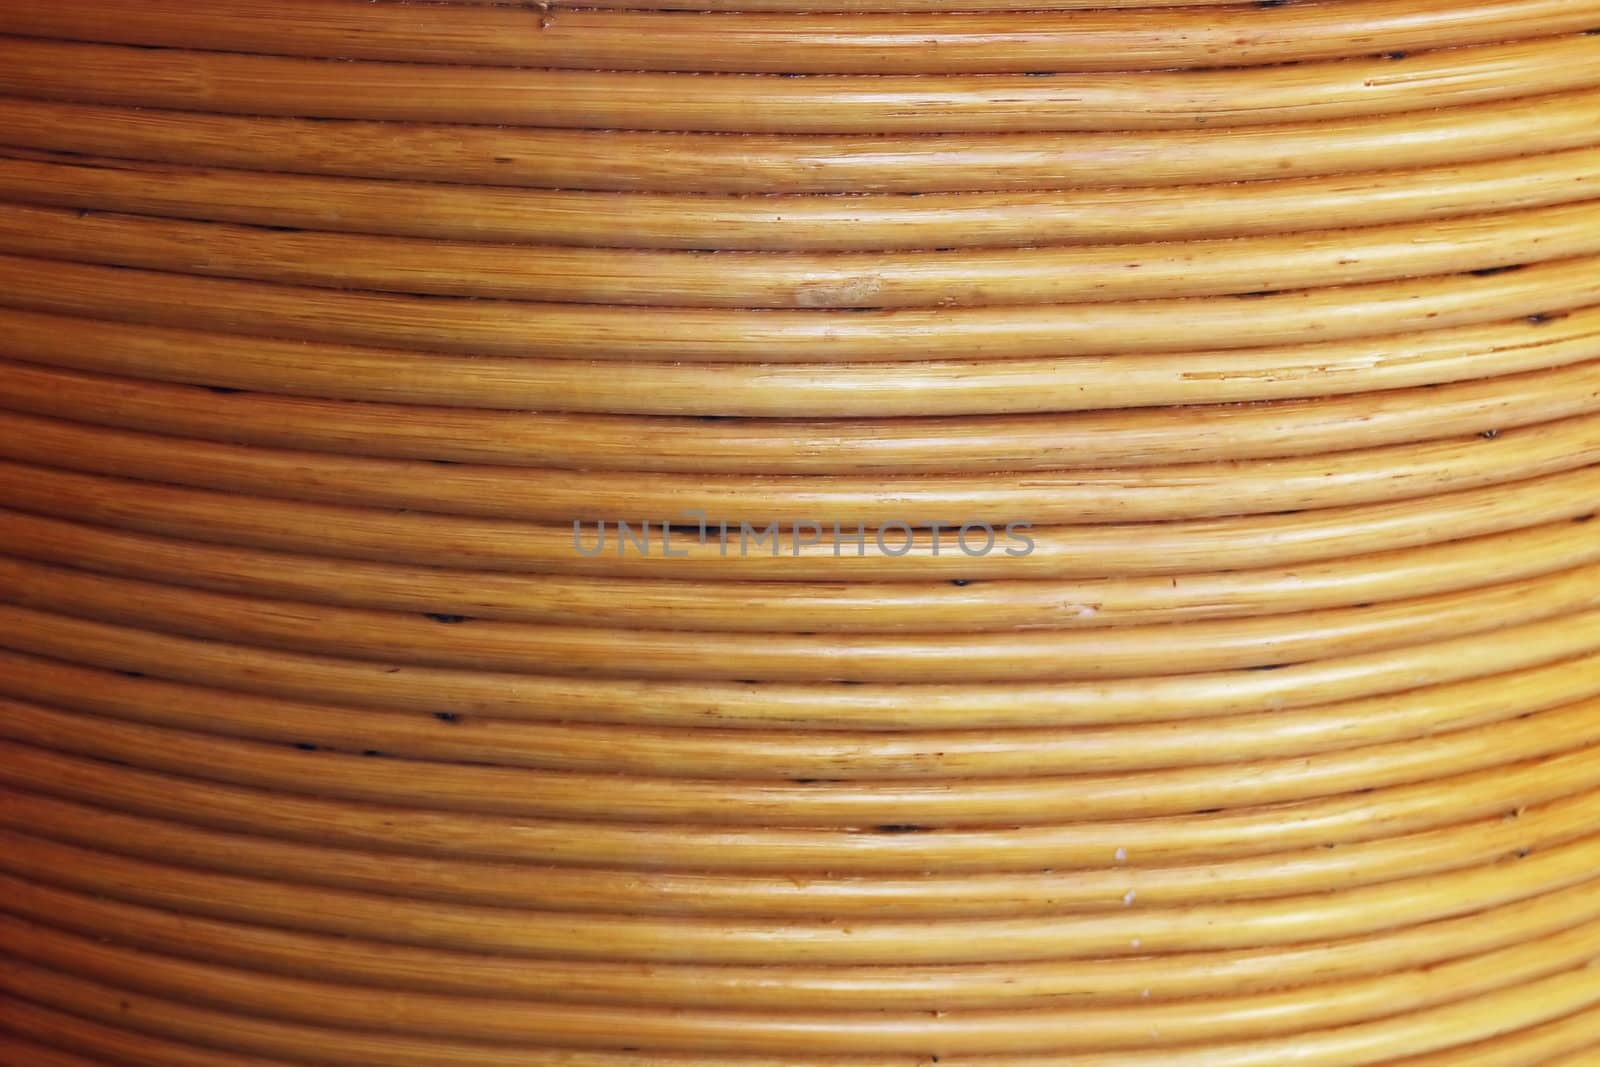 The convex surface of the product of bamboo sticks.